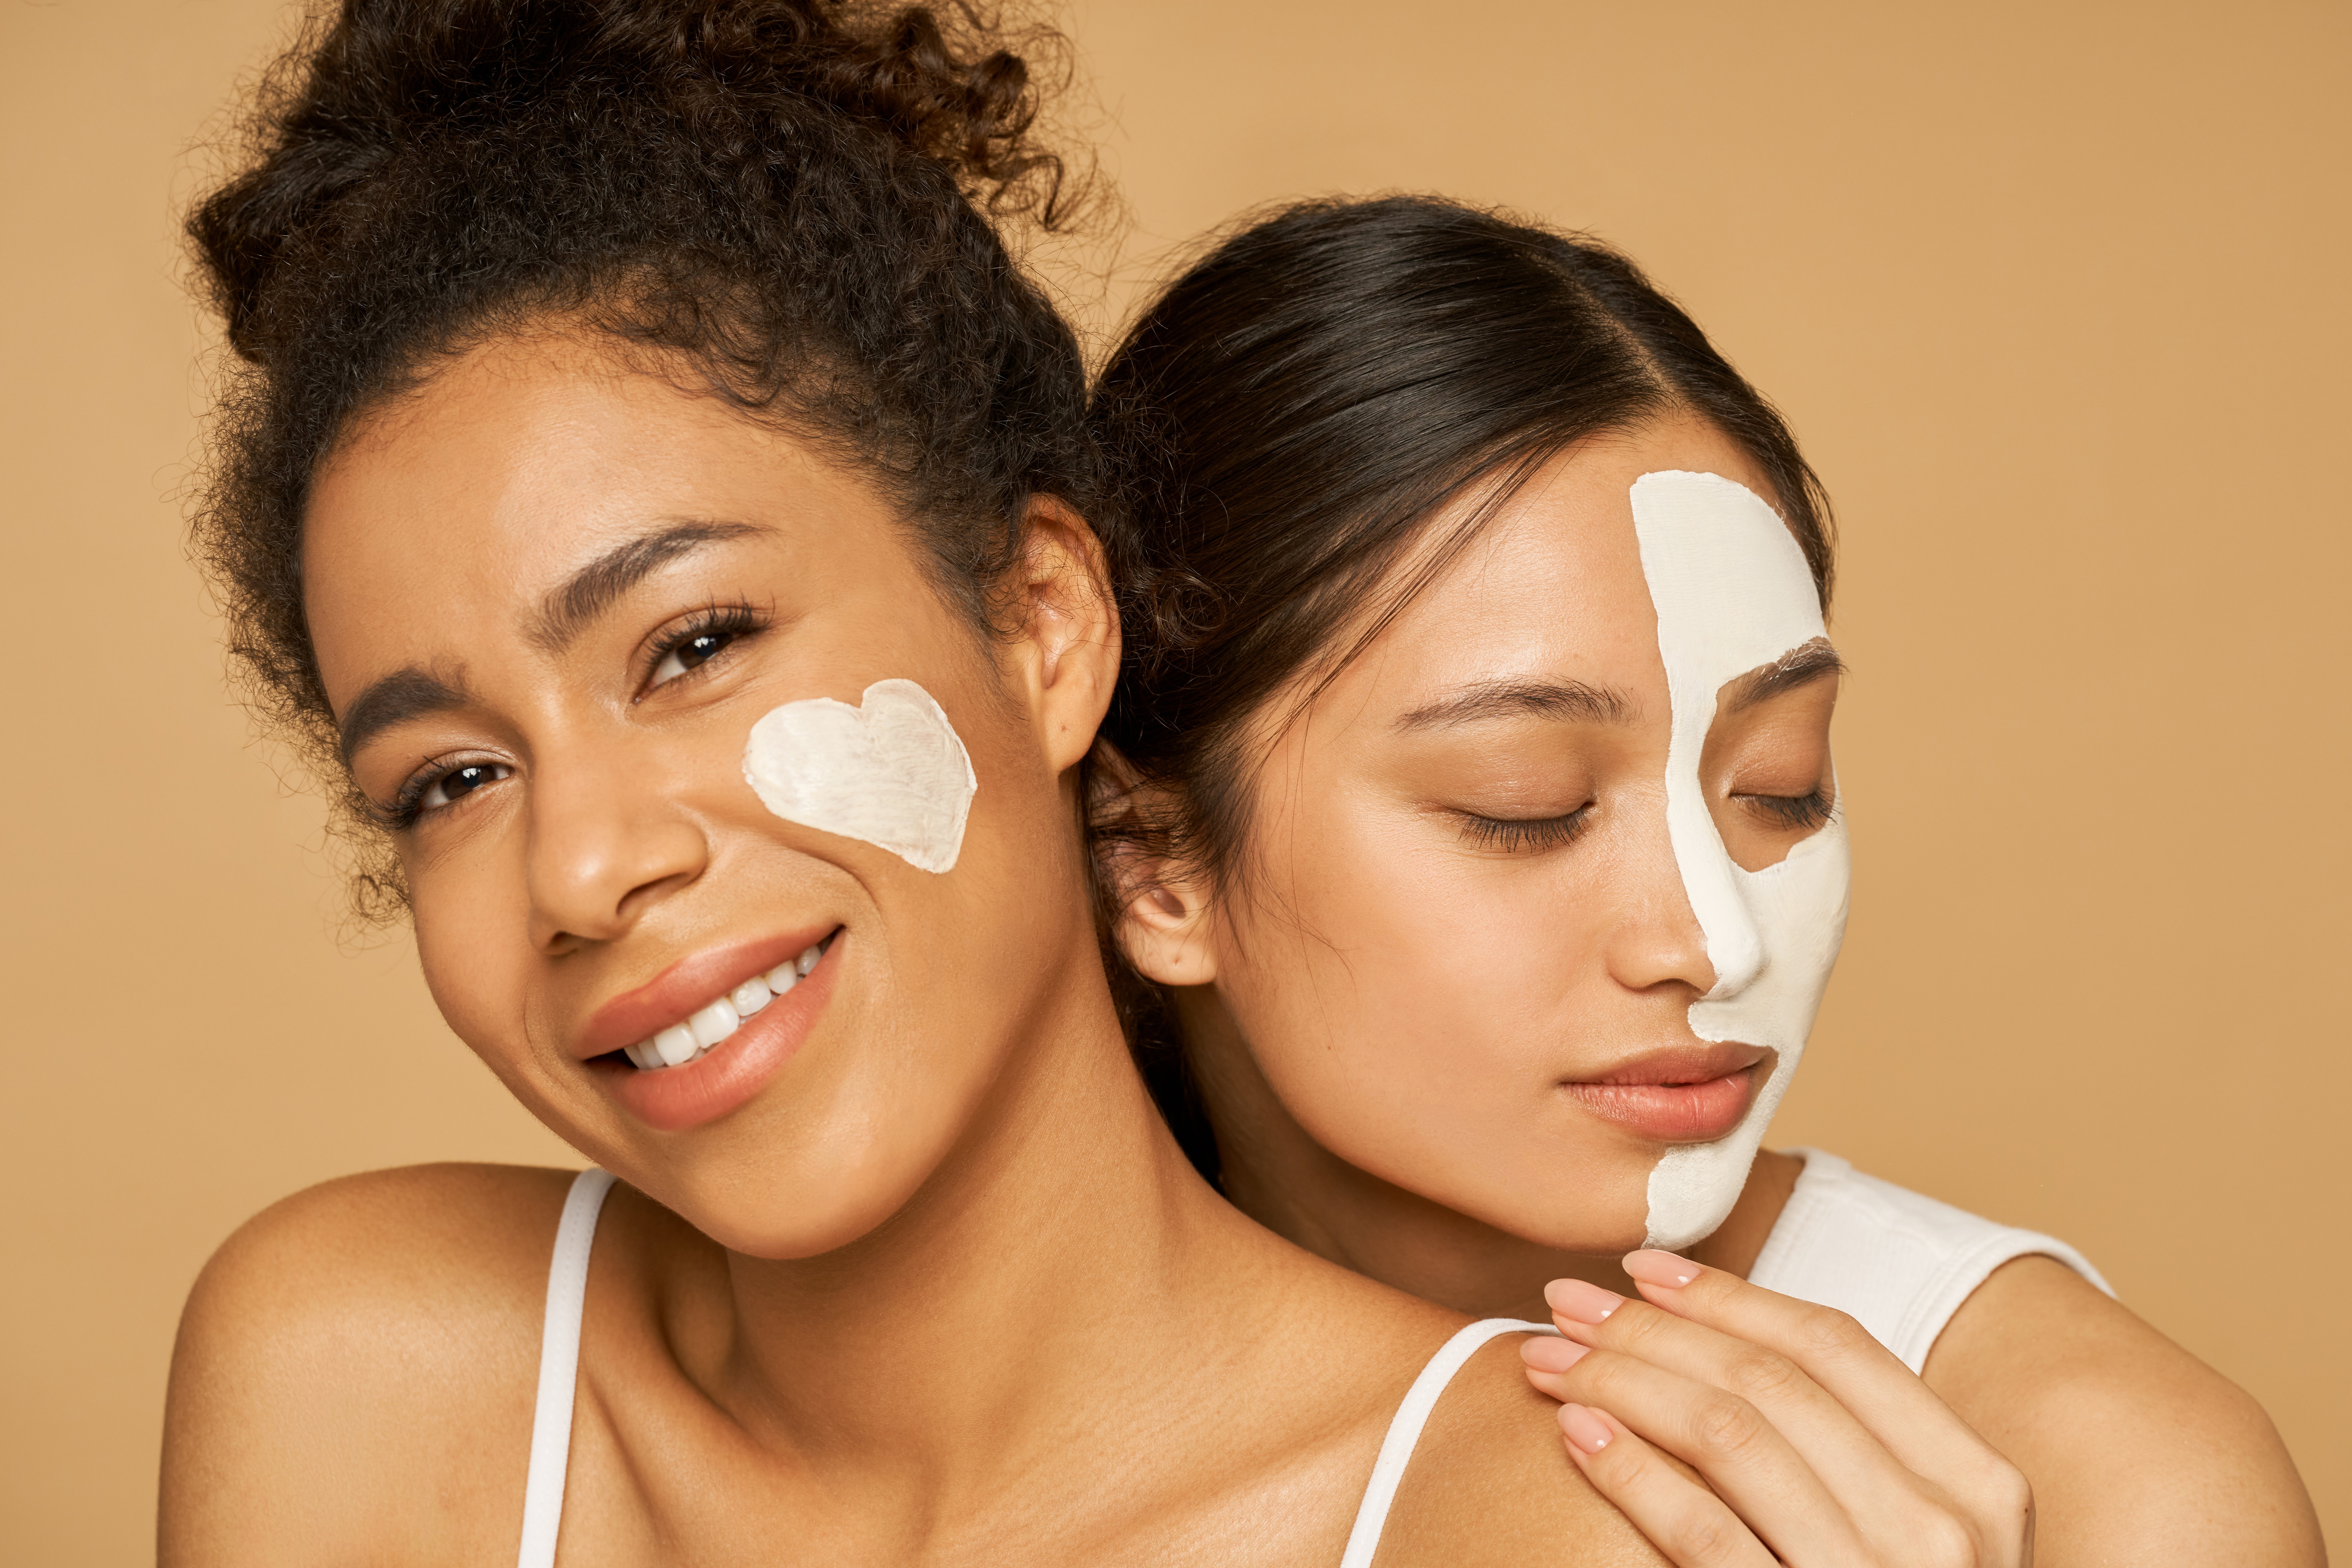 Women with lotion on their faces | Shutterstock 